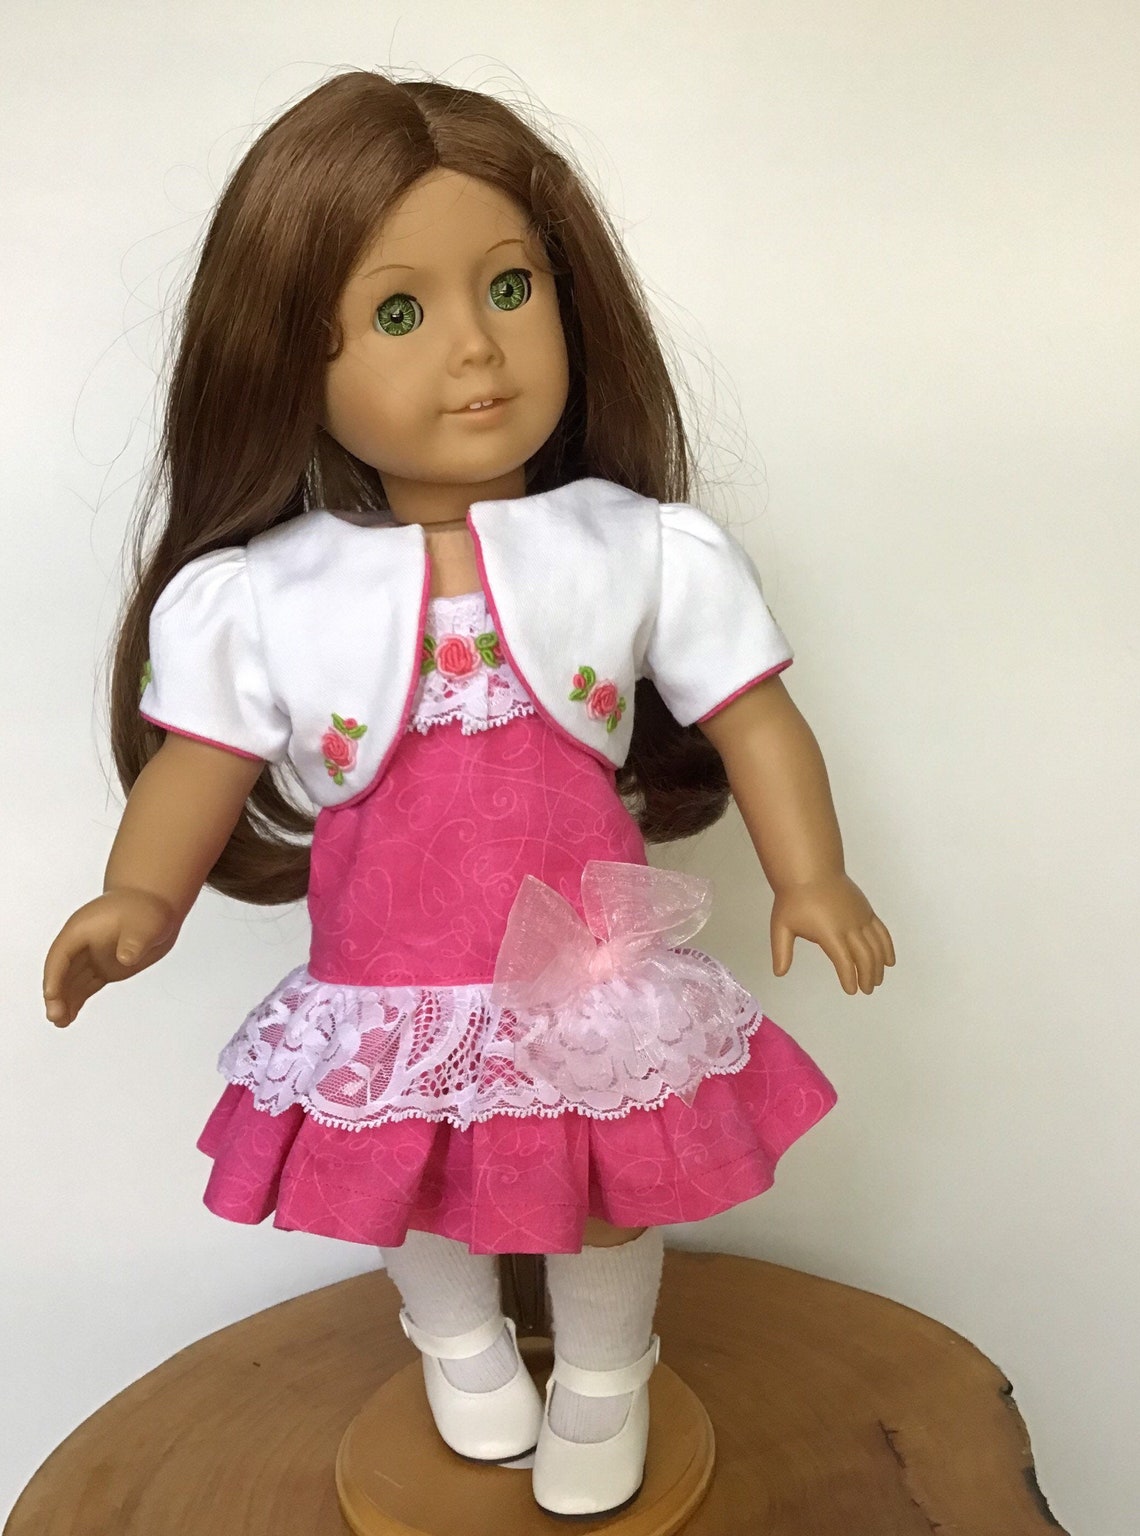 Hot Pink Summer Dress for American Girl Doll | Etsy